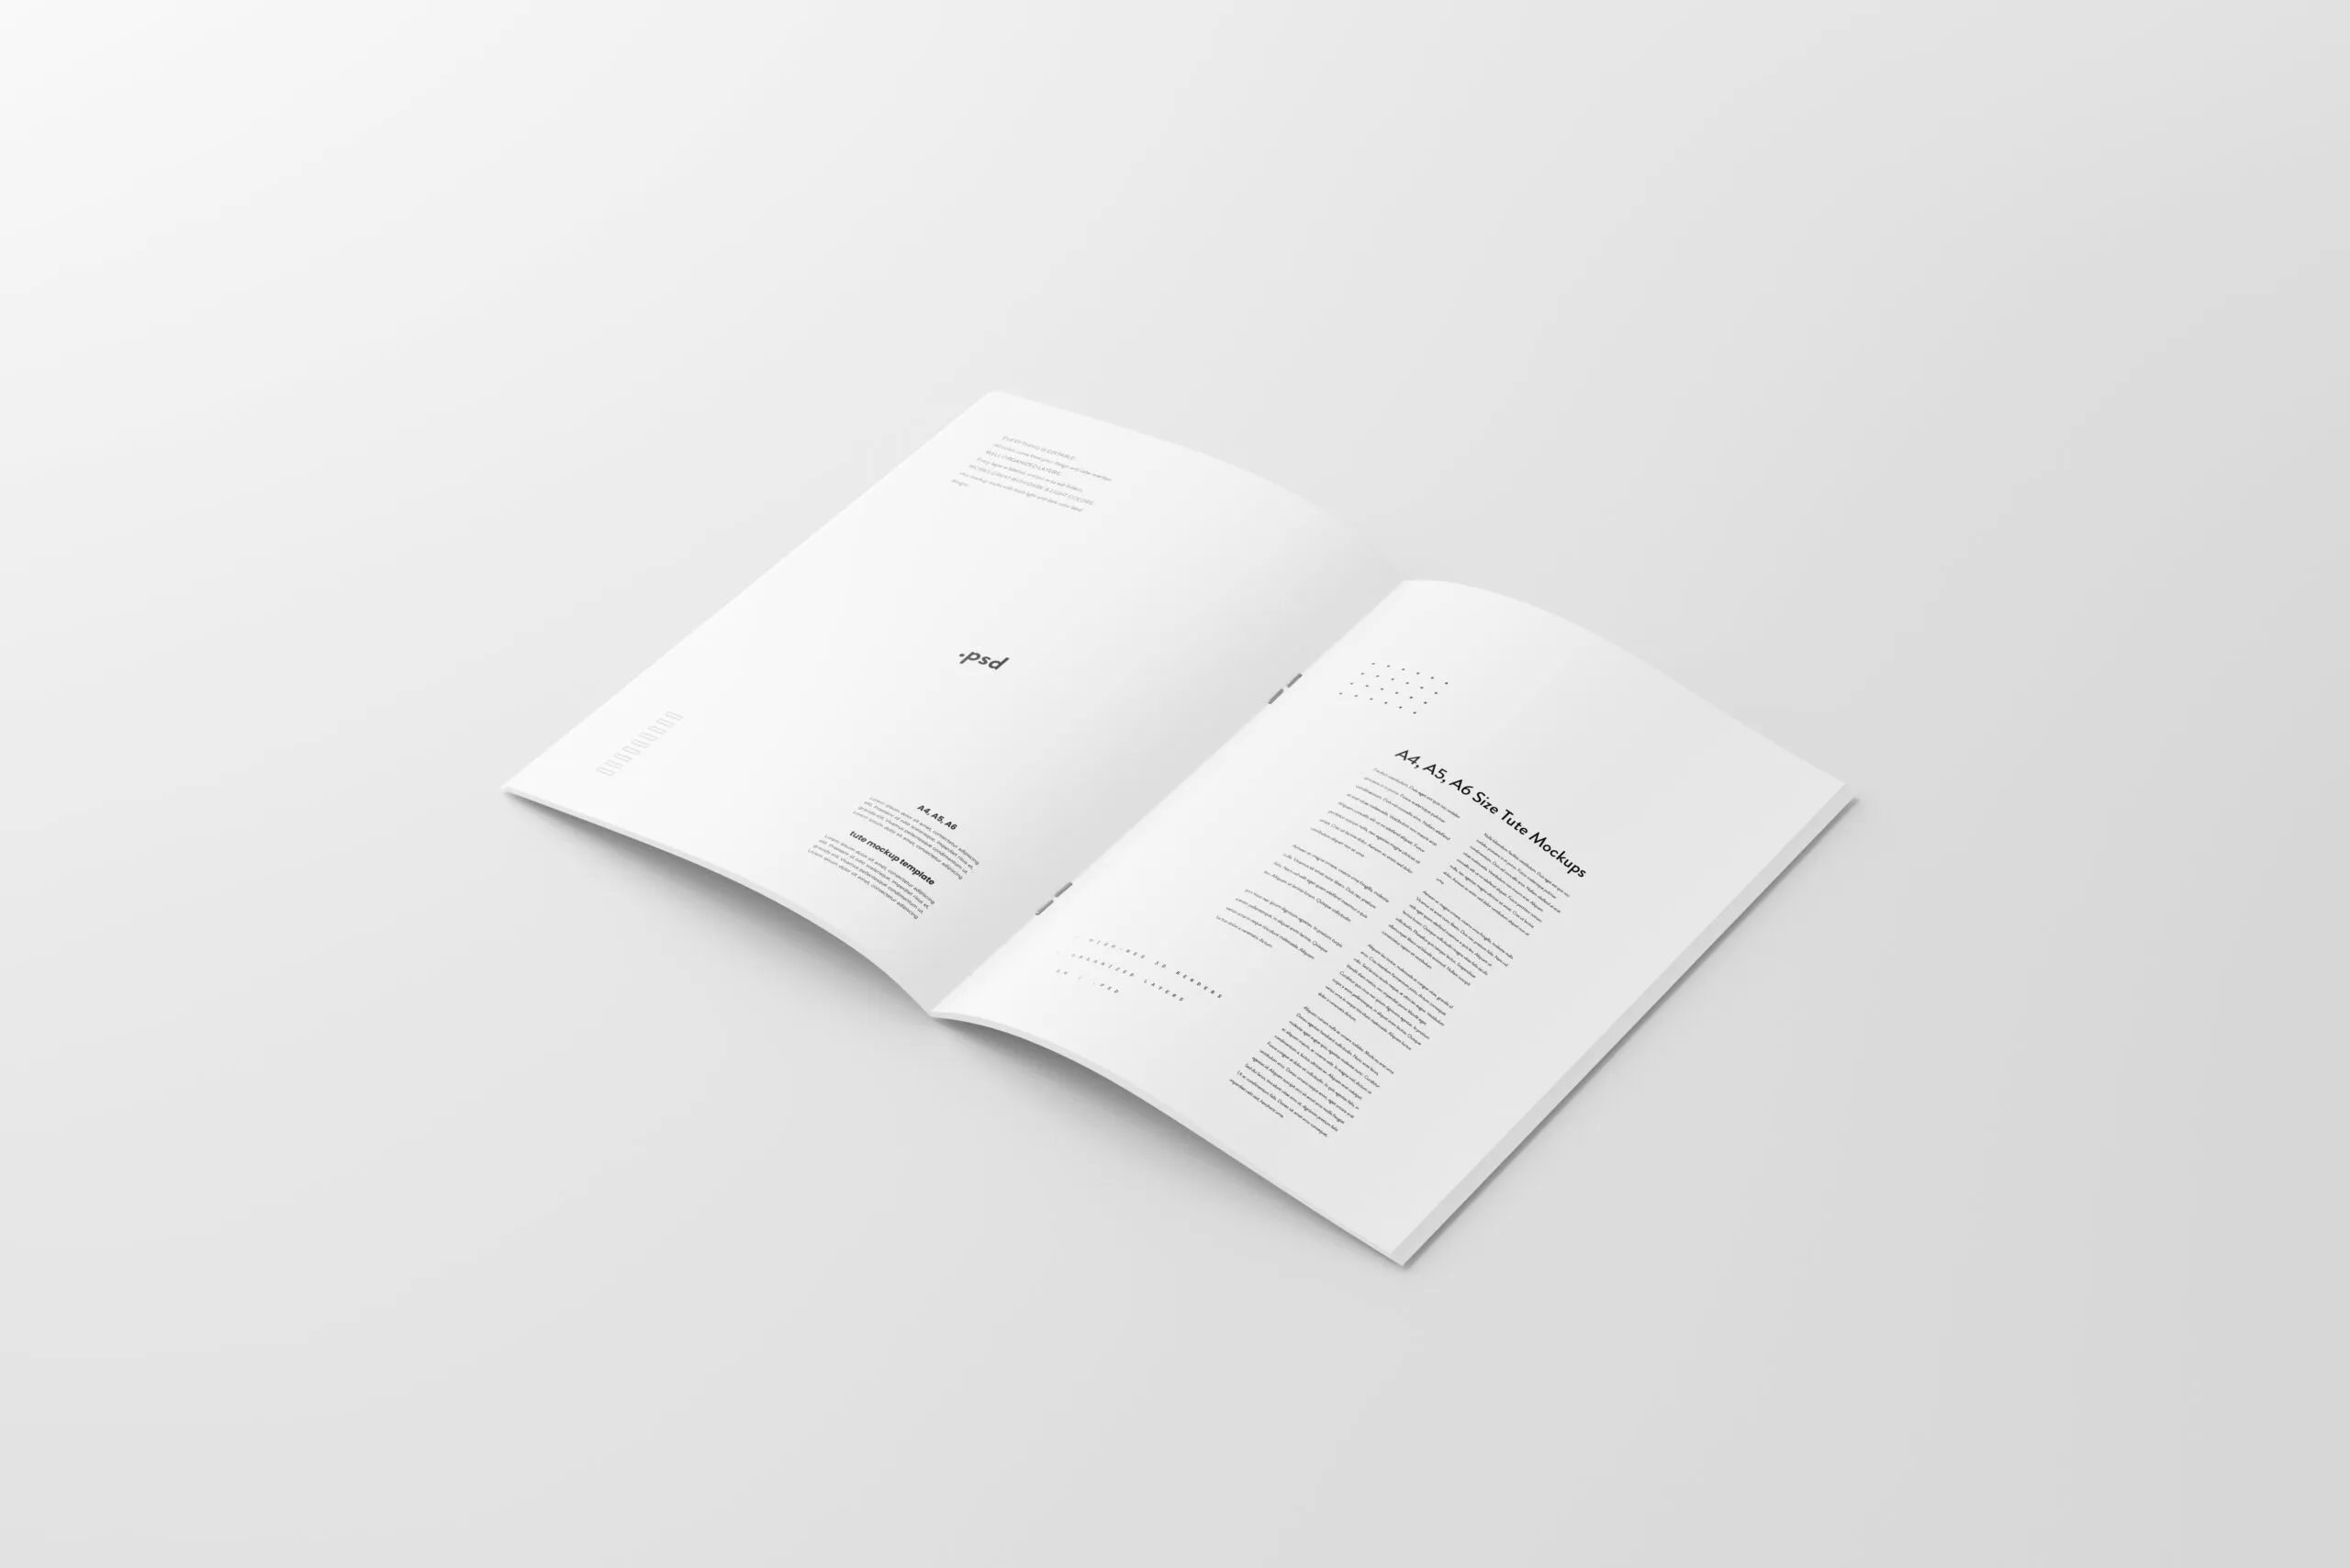 10 A4, A5, A6 Brochures Mockups in Varied Visions FREE PSD